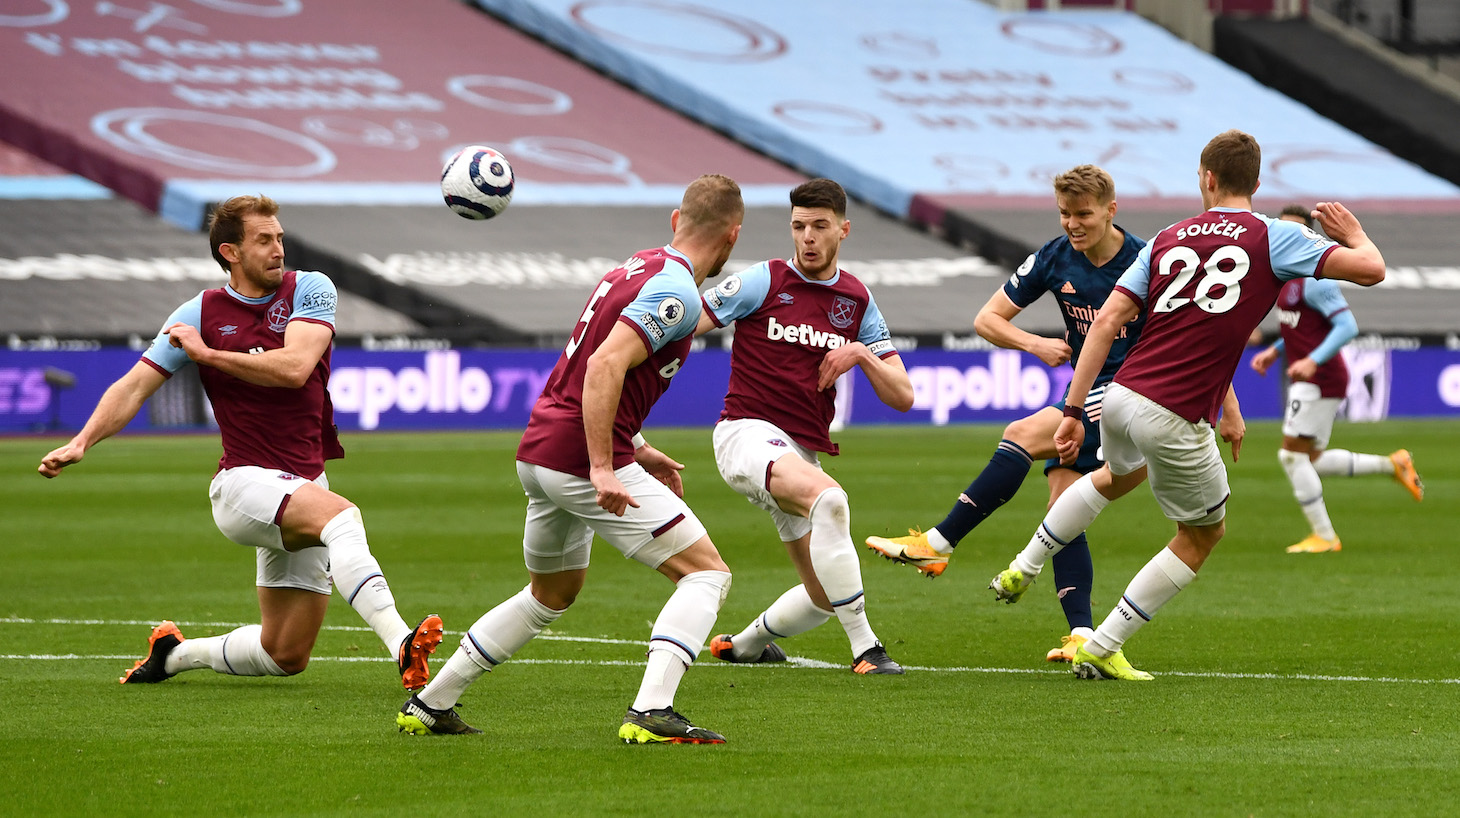 Martin Odegaard of Arsenal has a shot on goal whilst under pressure from Declan Rice and Tomáš Souček of West Ham United during the Premier League match between West Ham United and Arsenal at London Stadium on March 21, 2021 in London, England.